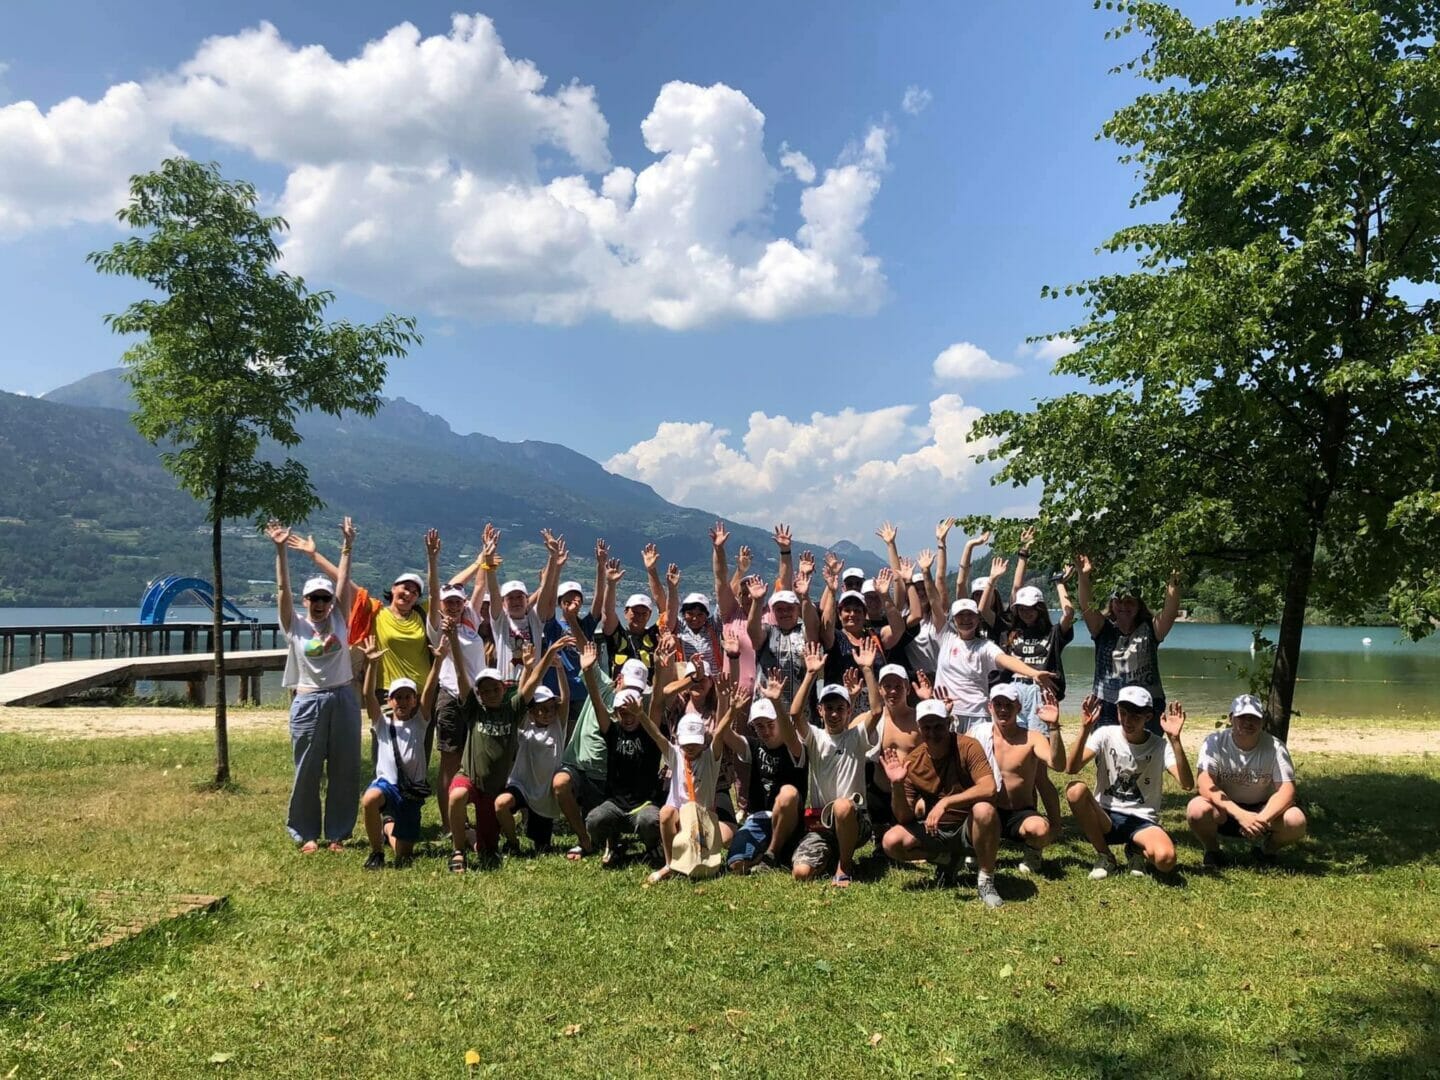 Children of the community at a summer camp in Italy organized in cooperation with the RAZOM Cultural Association of Ukrainians of Trentino and Help Ukraine Charity Fund 